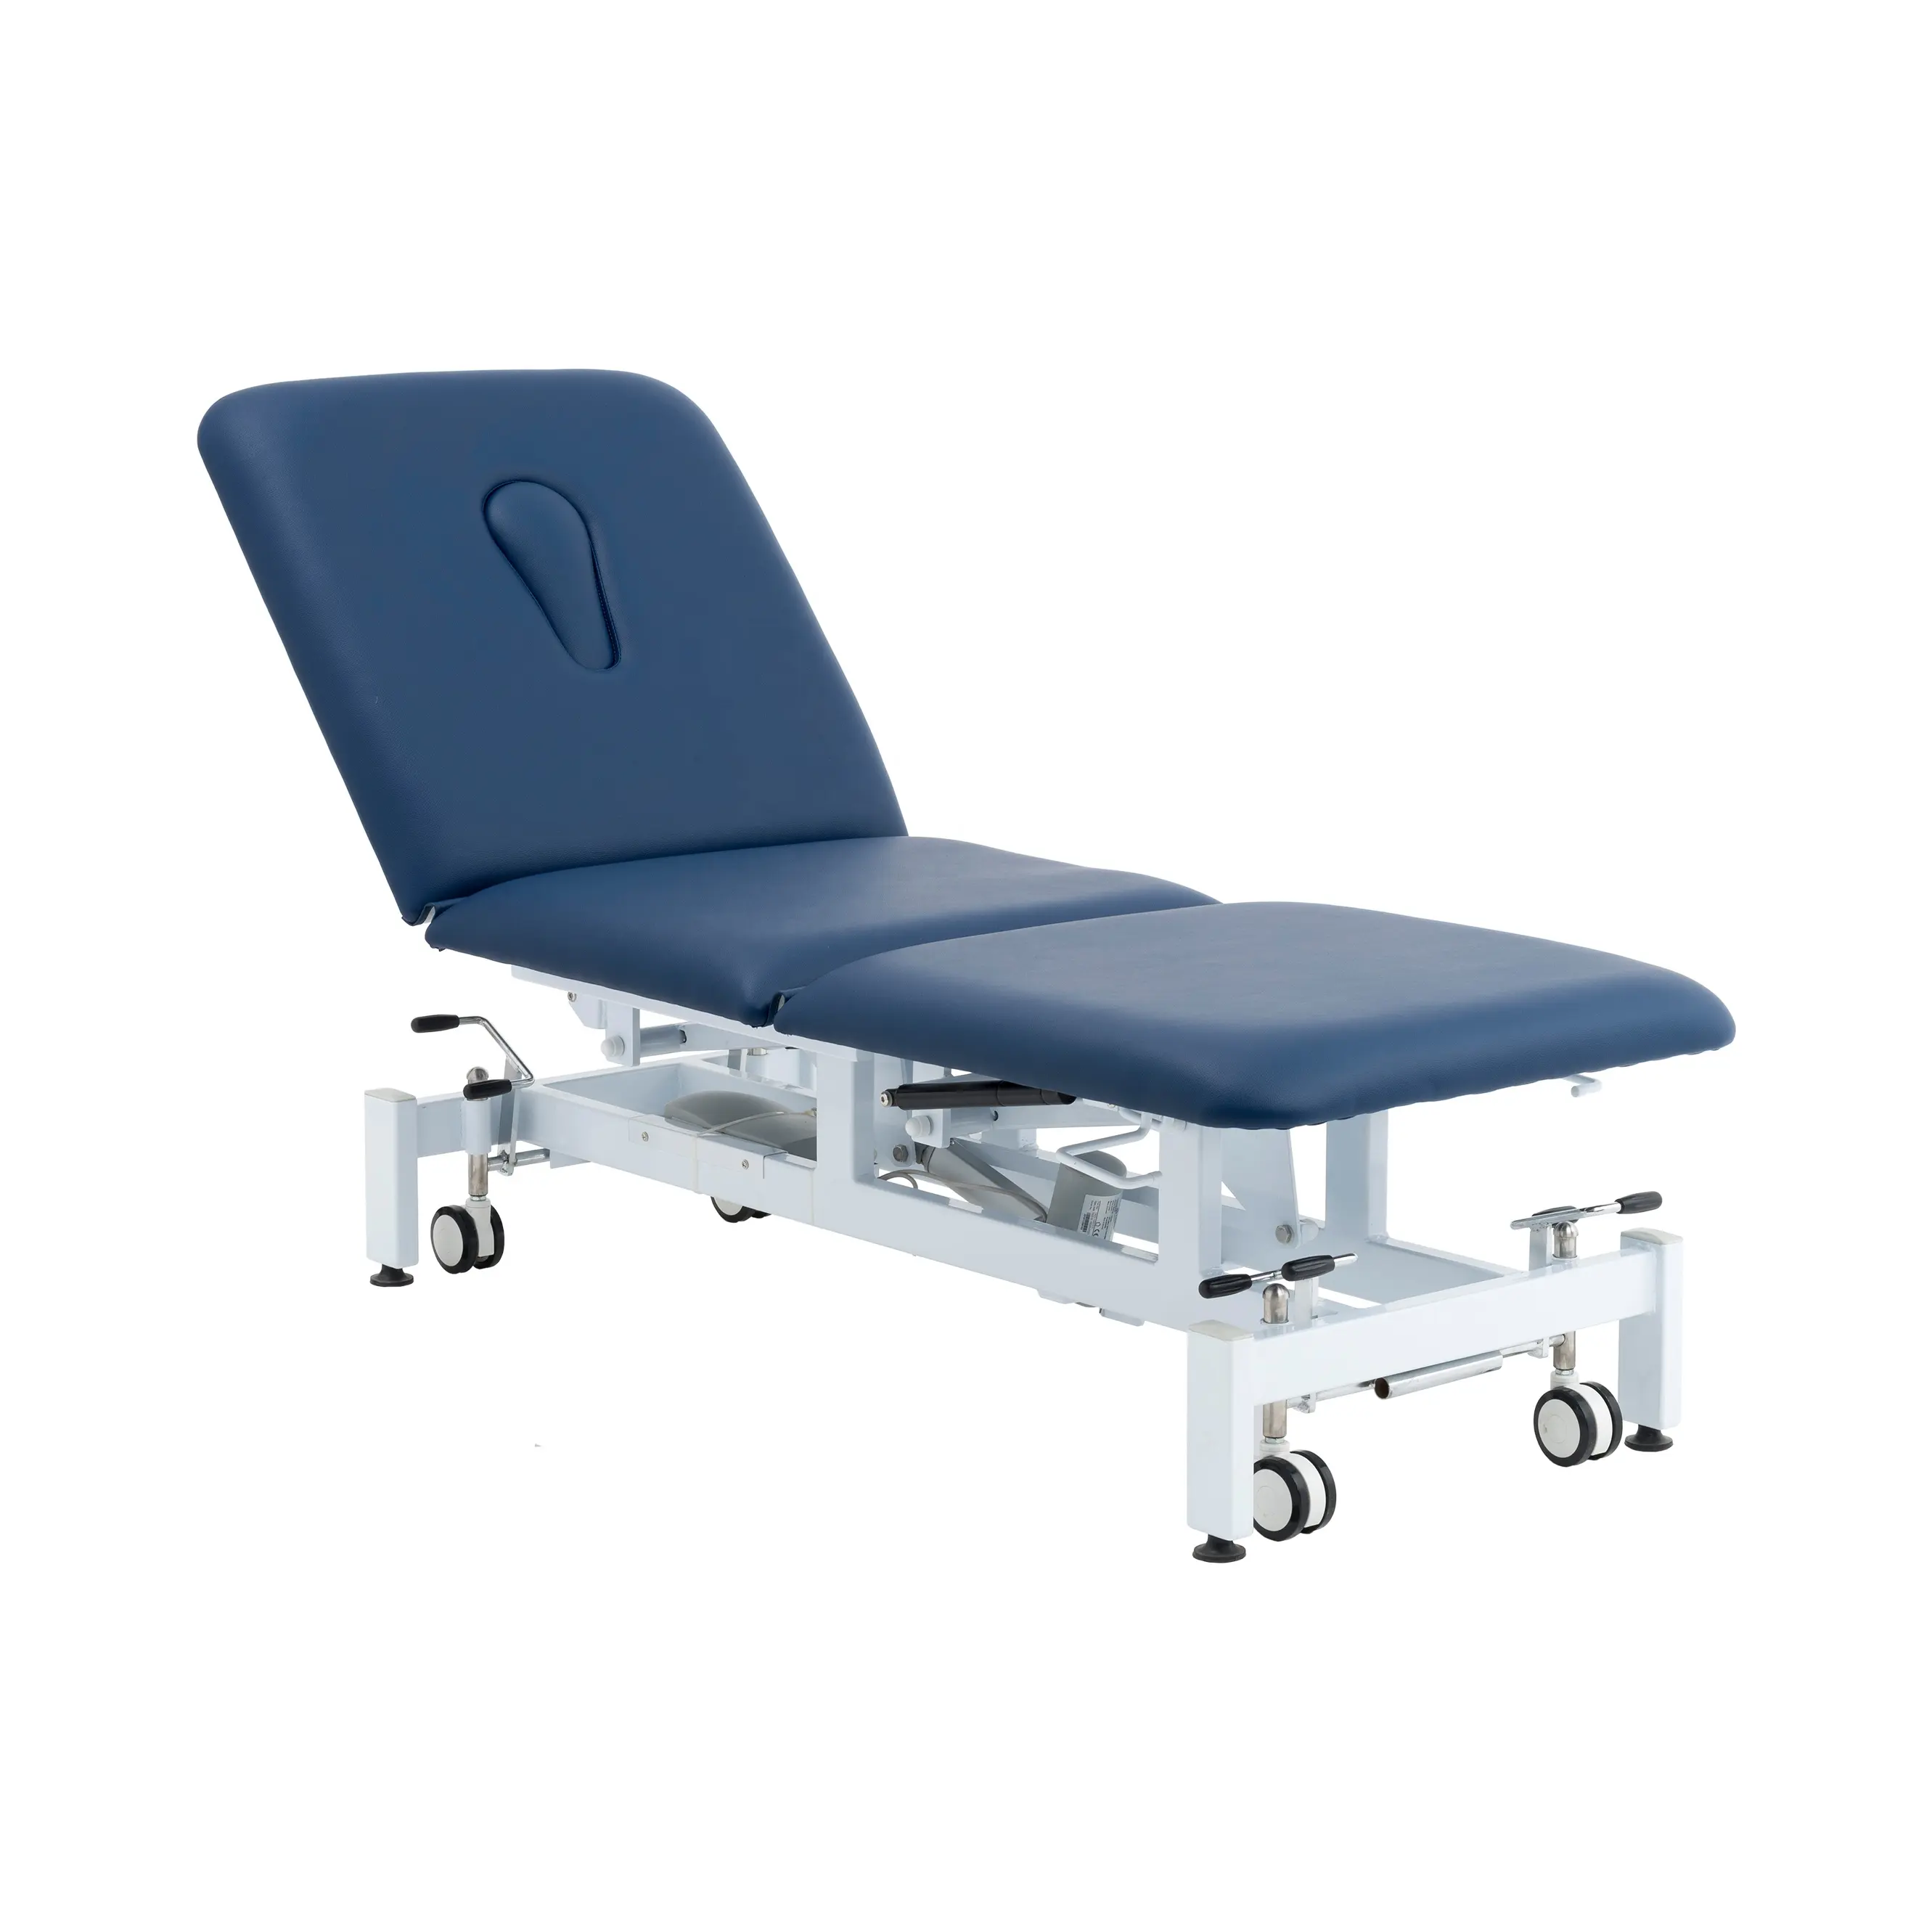 Hospital Furniture 3 Section HI-LOW Electric Medical Bed Examination Couch